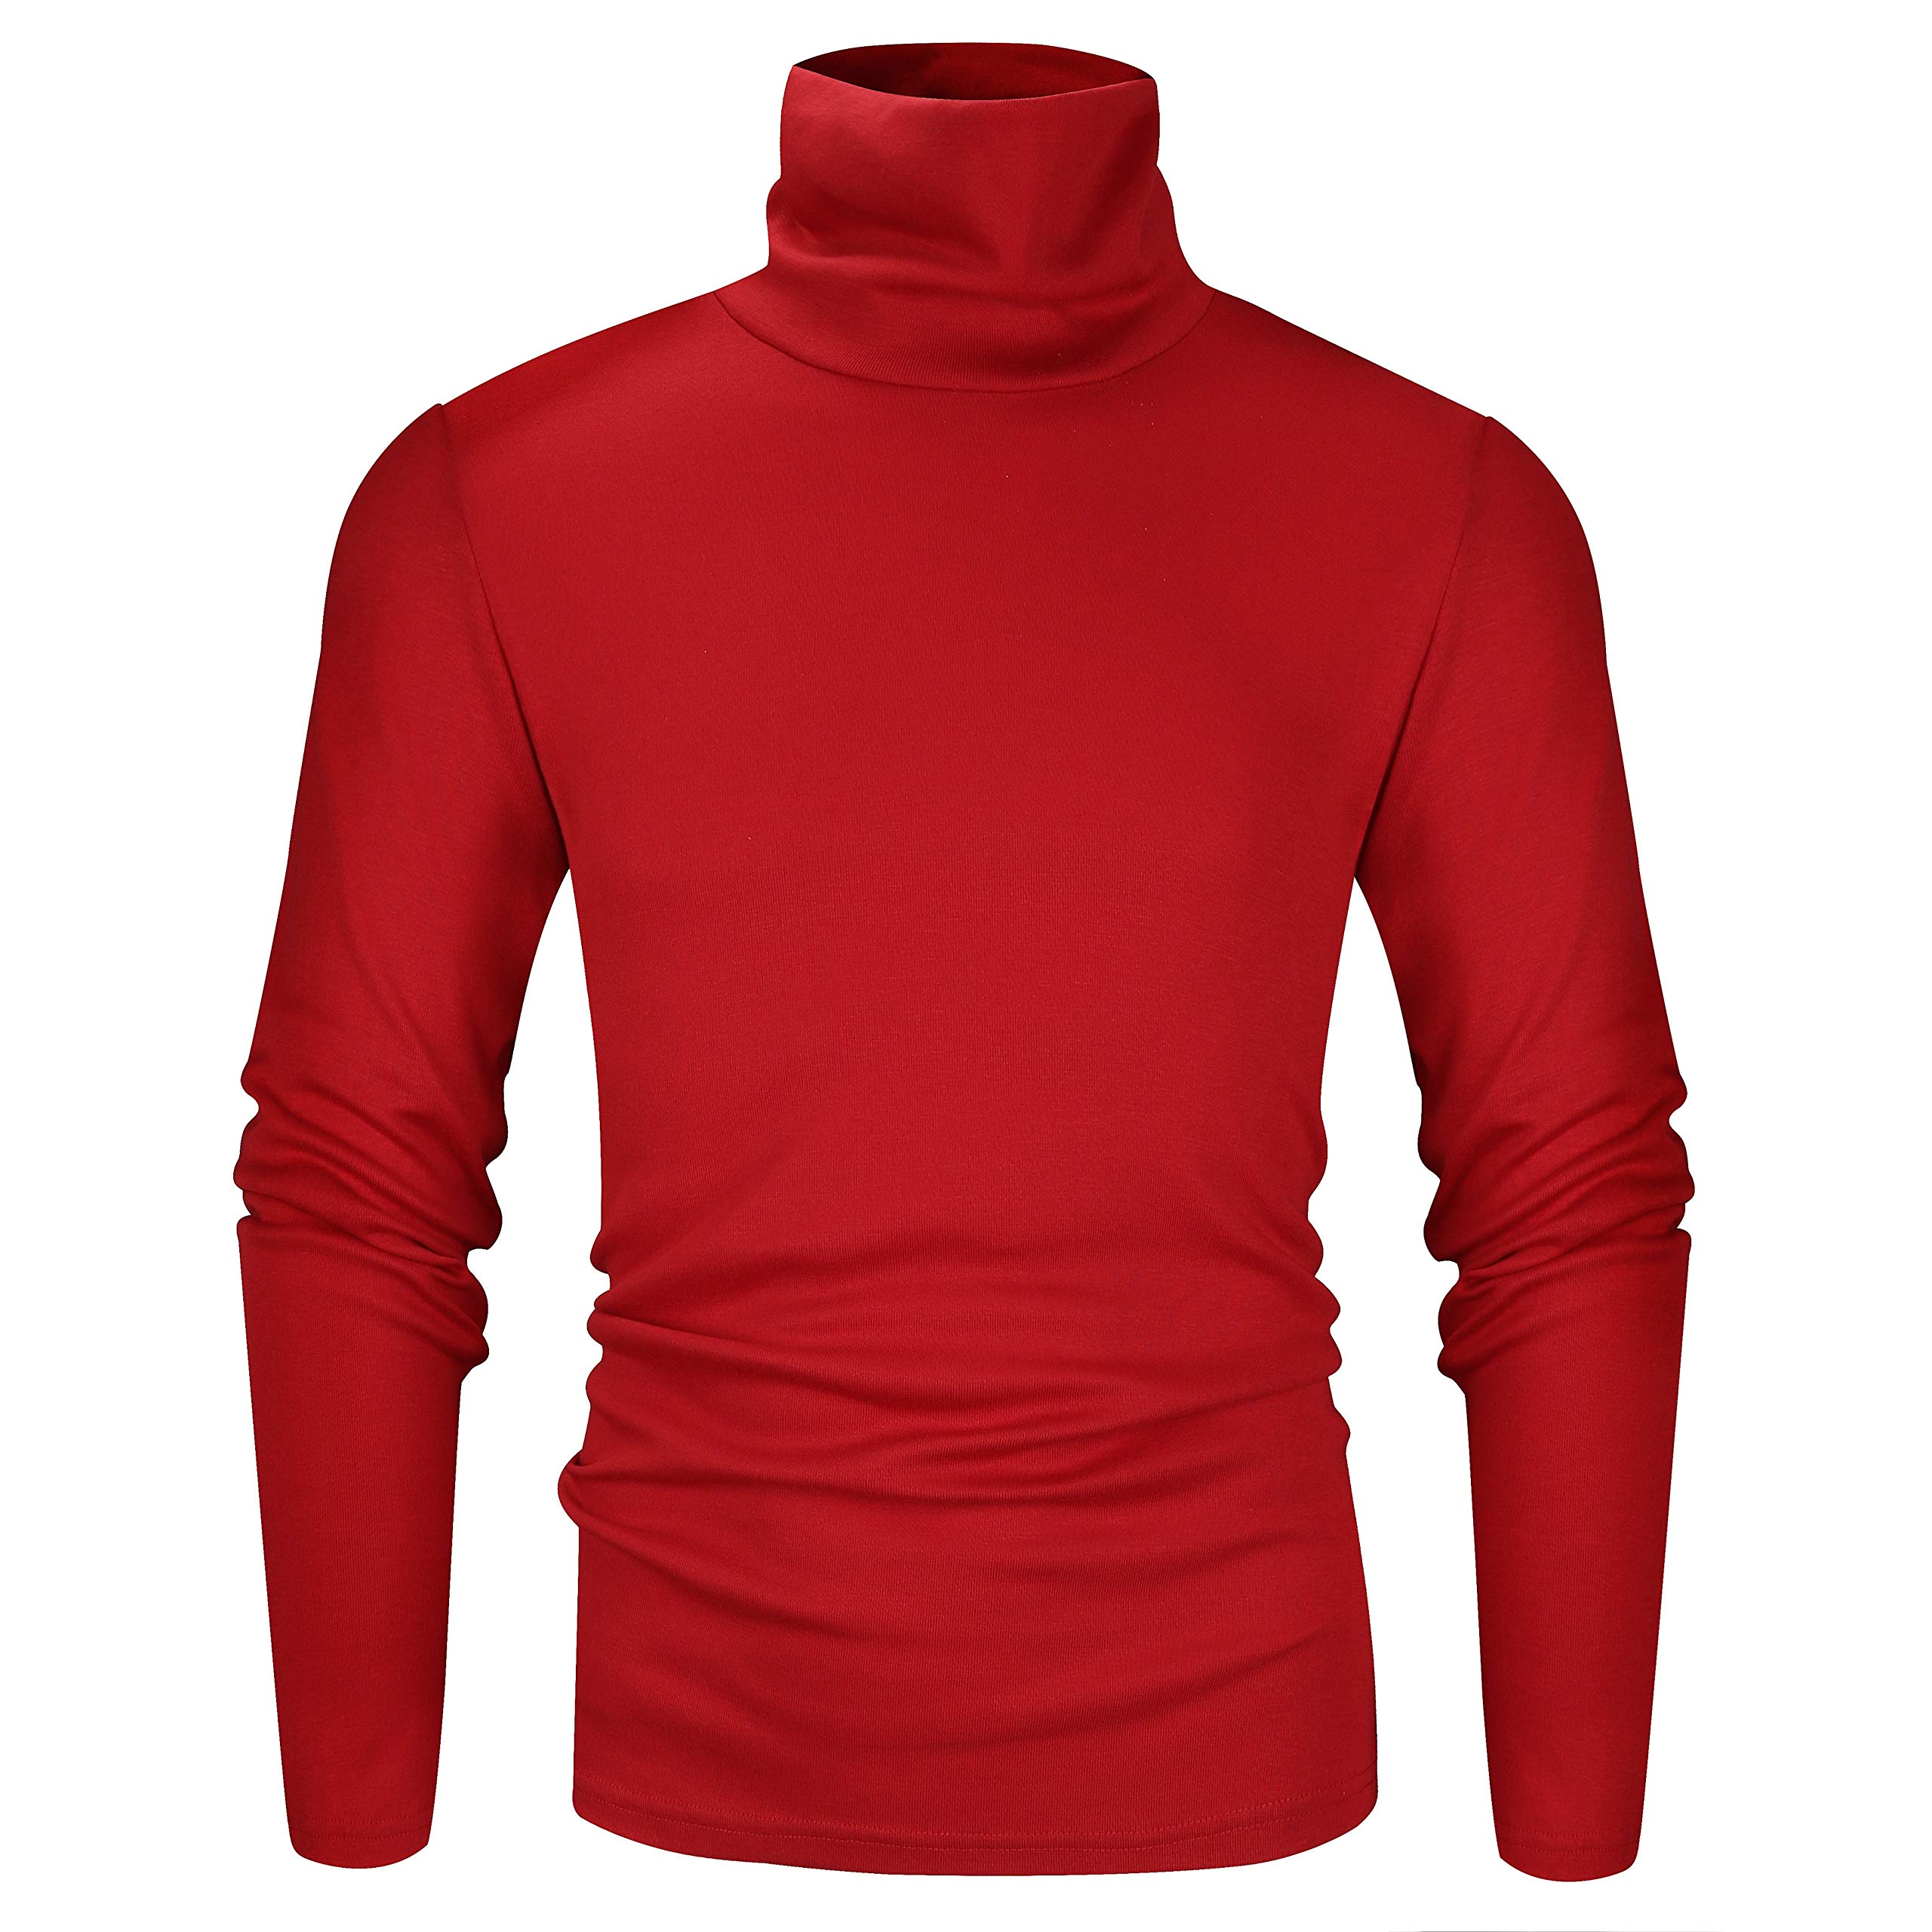 Derminpro Men's Thermal Turtleneck Soft Long Sleeve T-Shirt Red Small